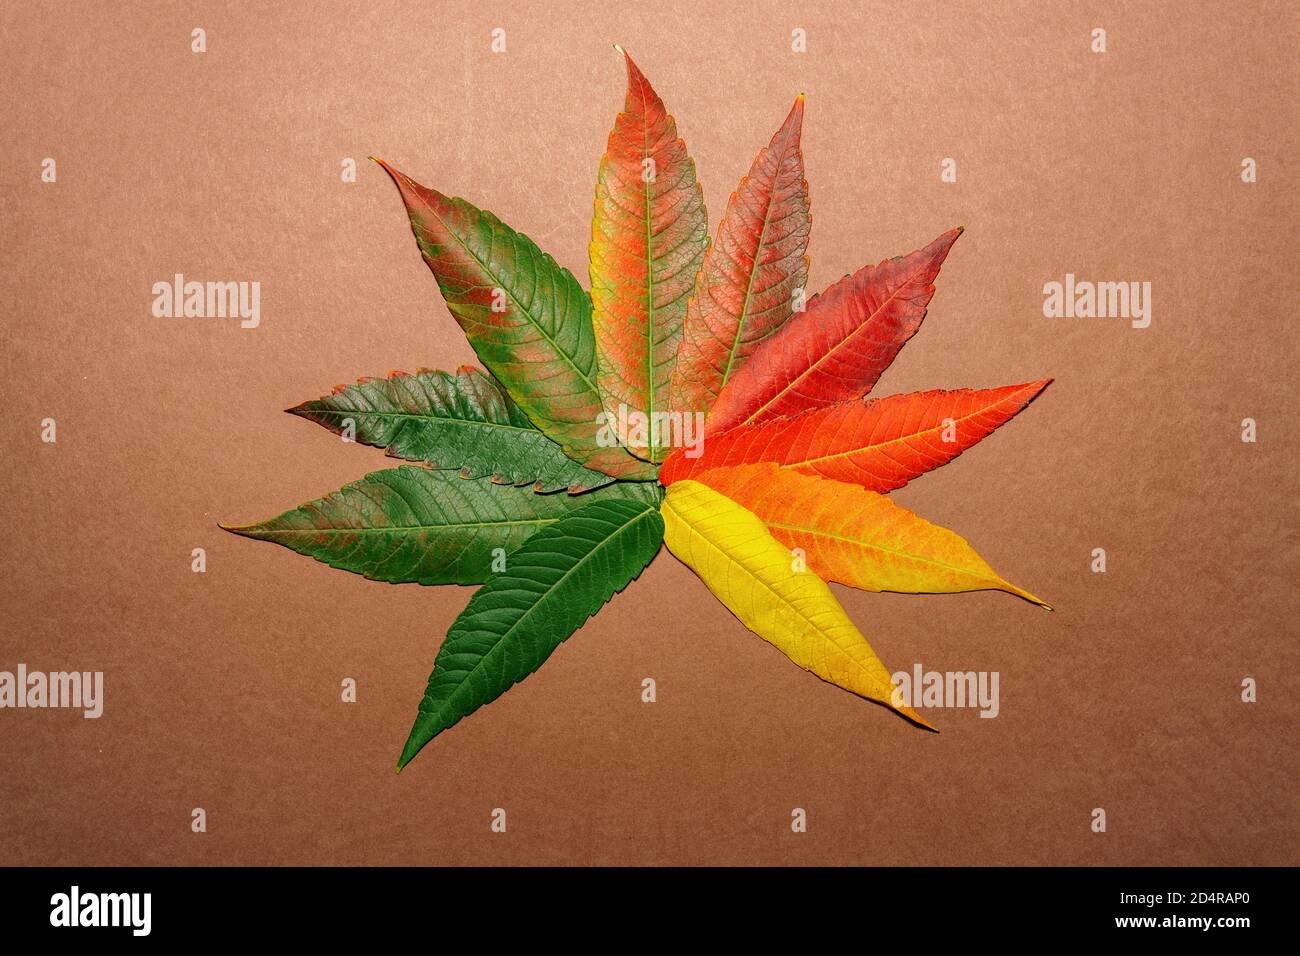 Autumn leaf made with autumn colorful leaves Stock Photo